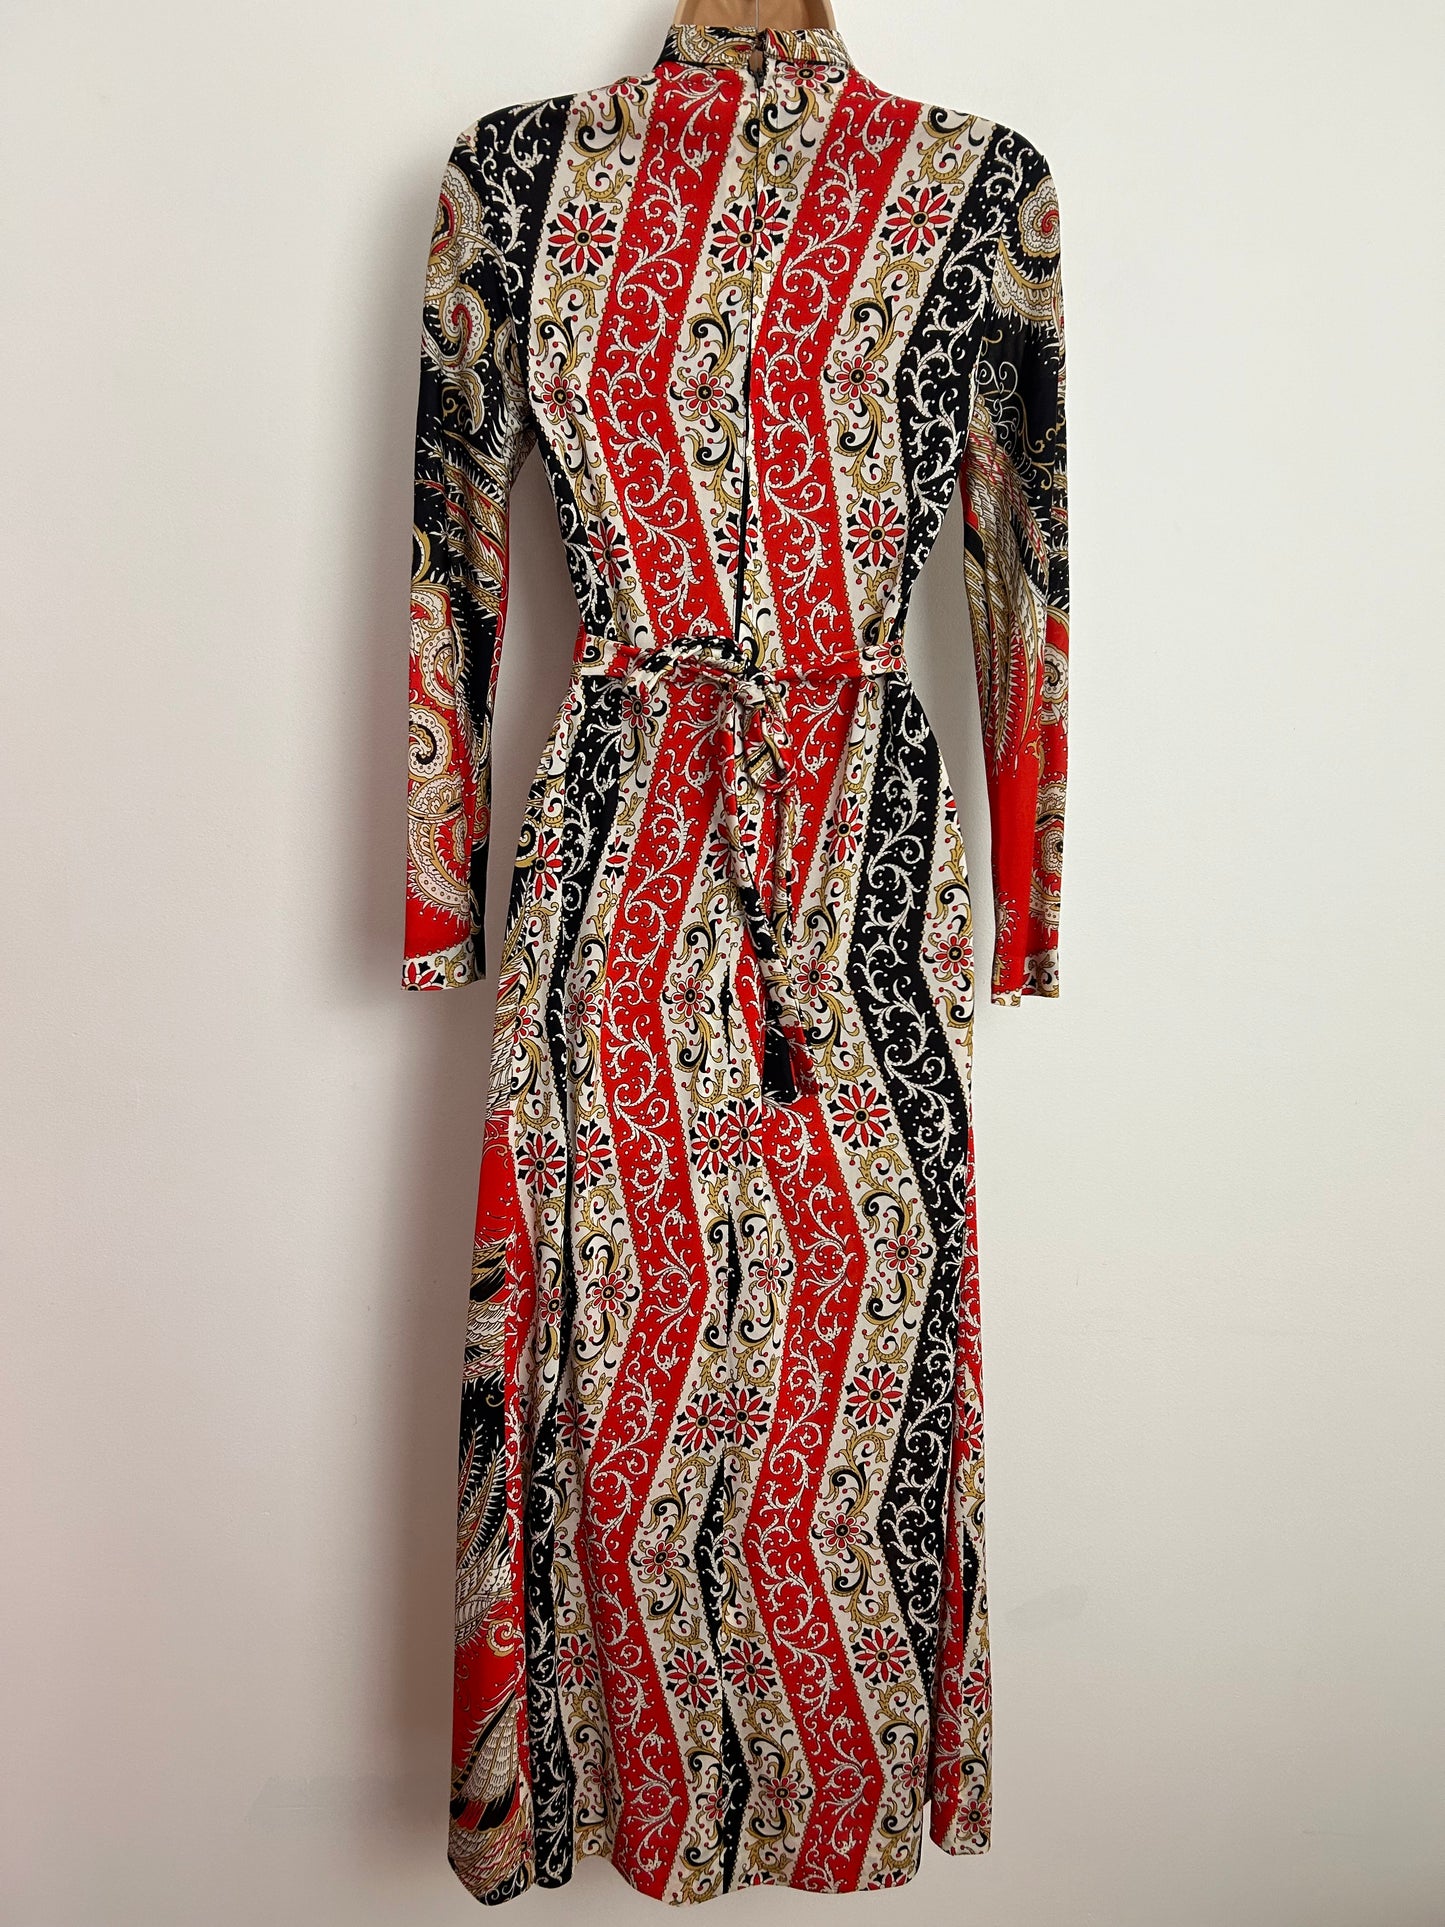 Vintage 1970s YOUNG IDEAS BY RHONA ROY UK Size 6 Red Black & Sandy Beige Abstract Dragon Print Midaxi  Dress